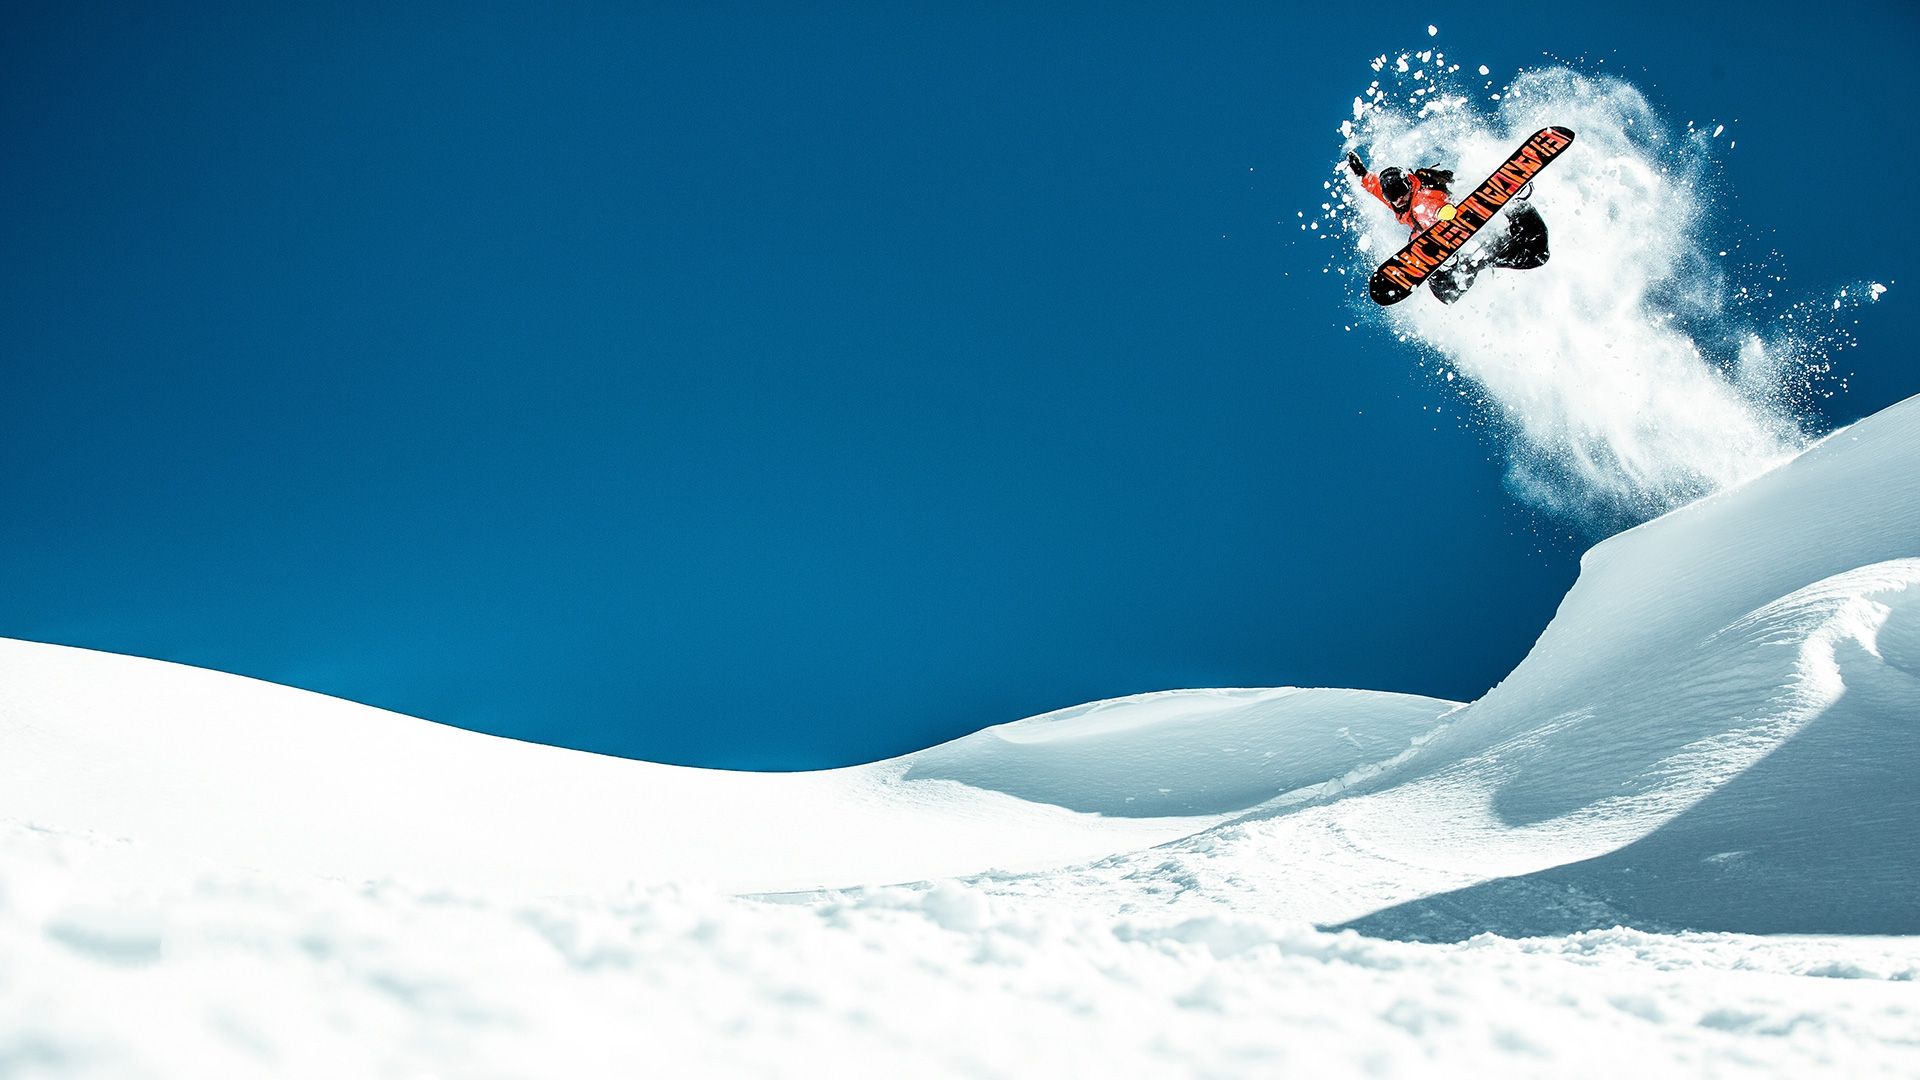 Snowboarding Background Download Free